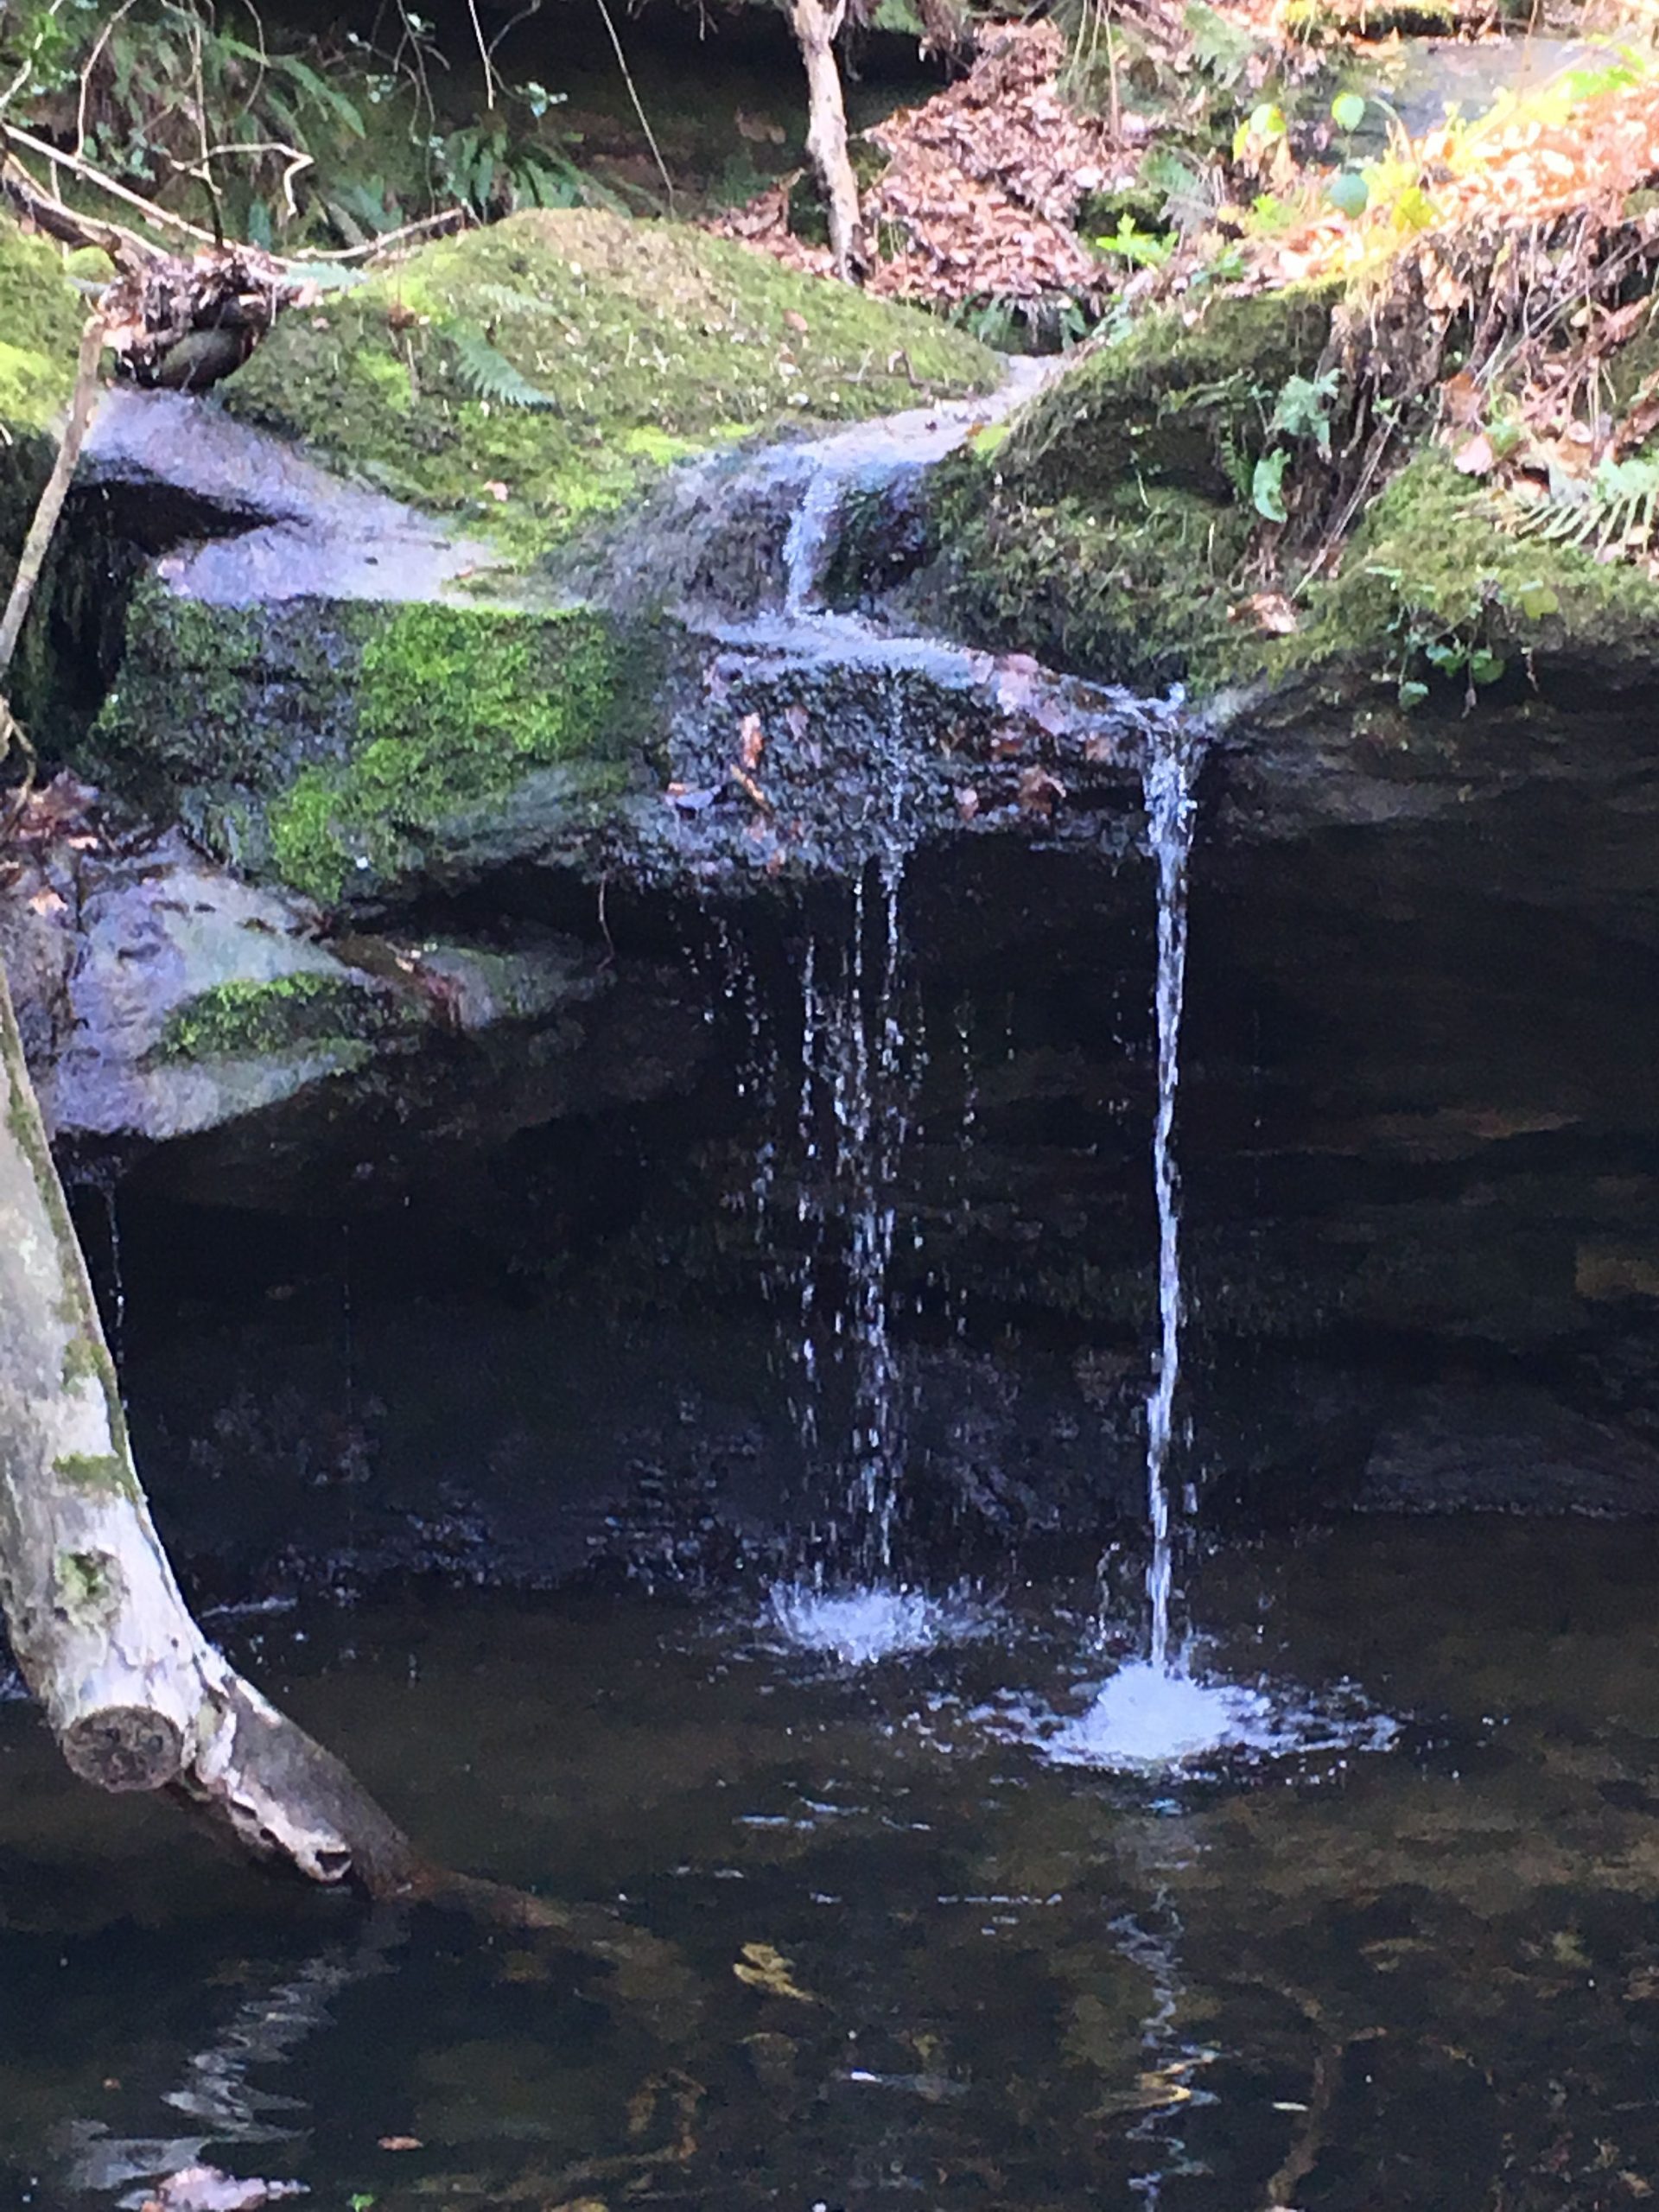 The falling water in the stream captures the beauty and power of nature in all its glory.